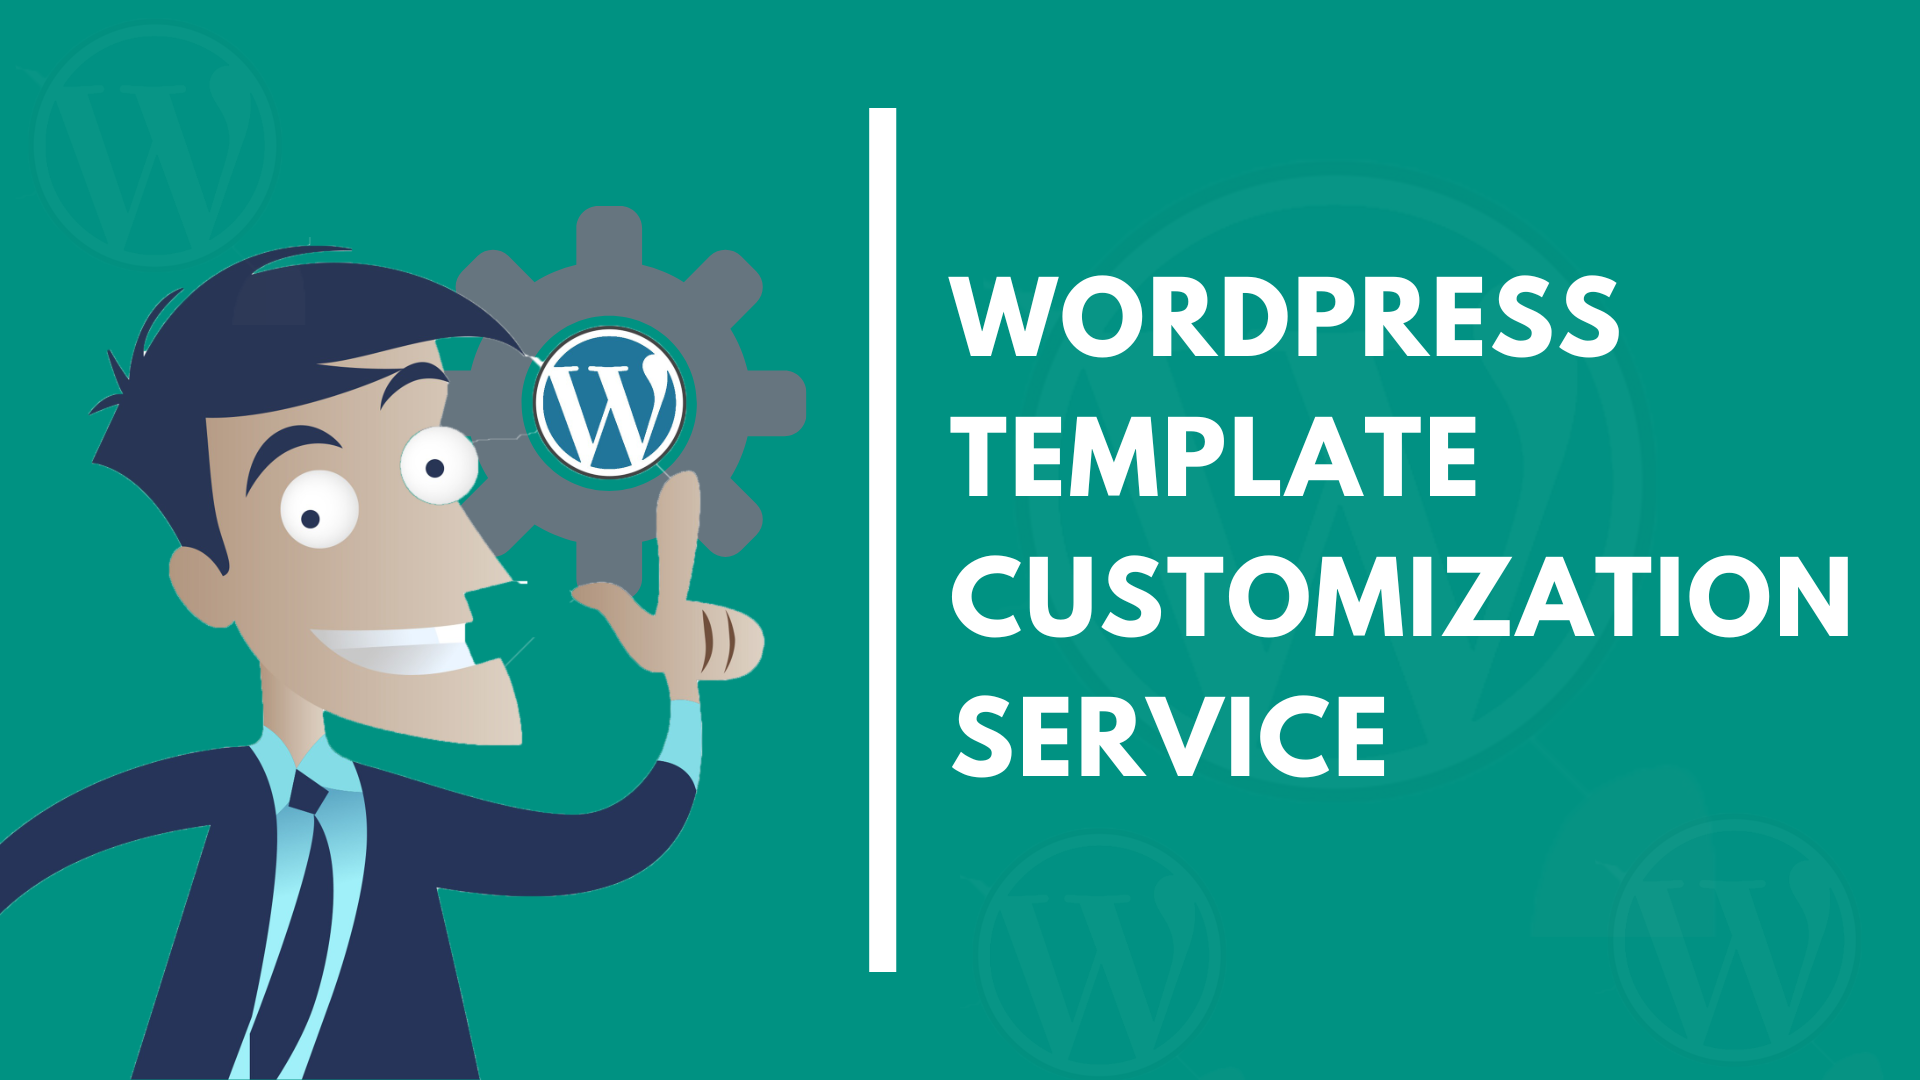 Are you looking for WordPress Template Customization Service?